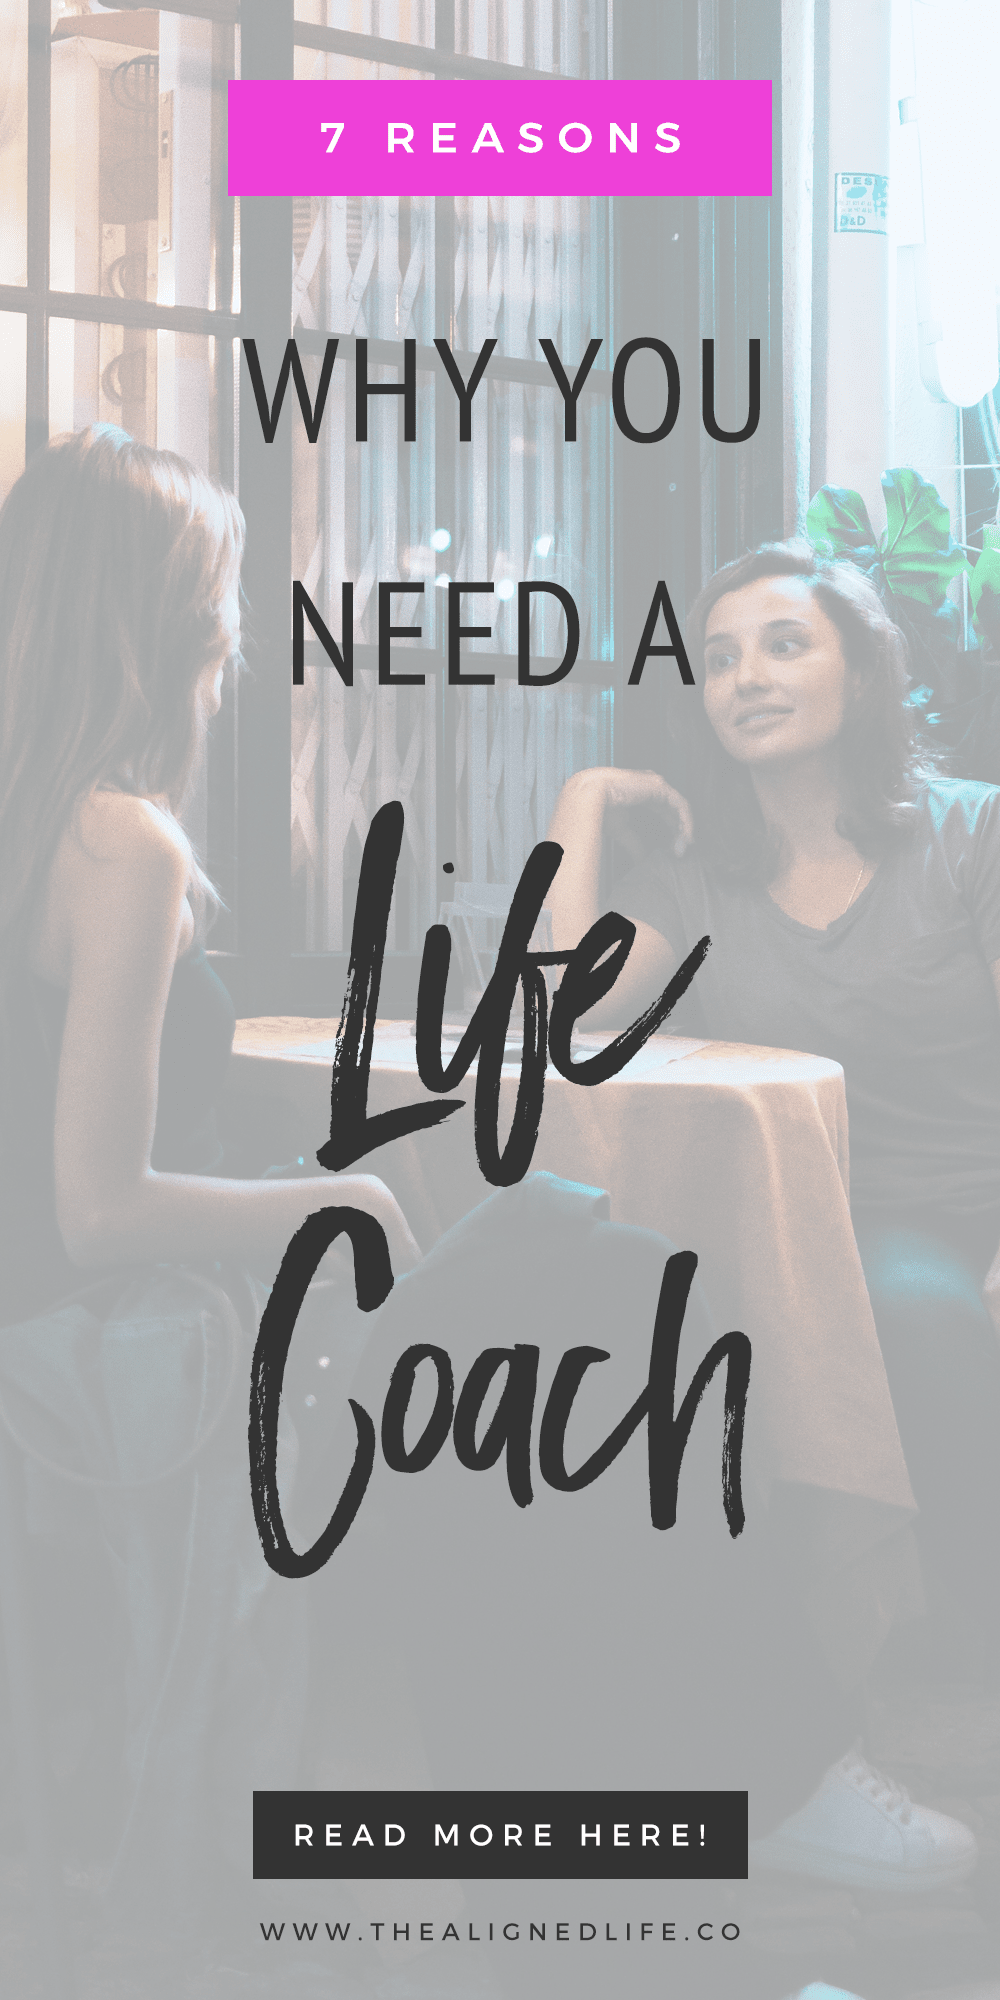 7 Reasons Why You Need A Life Coach